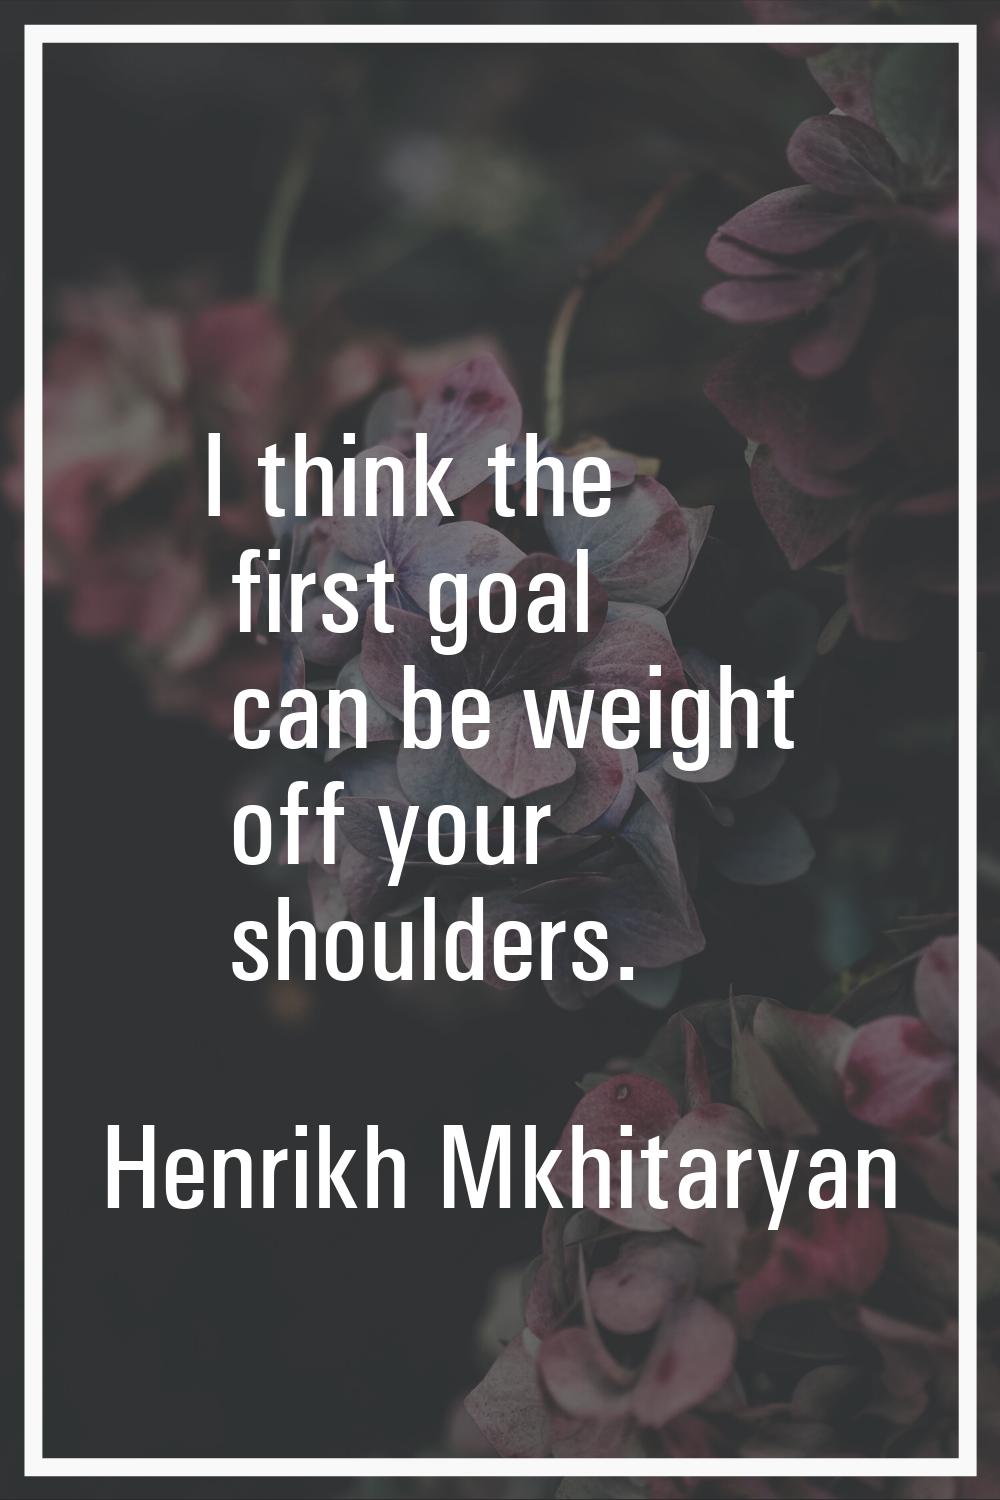 I think the first goal can be weight off your shoulders.